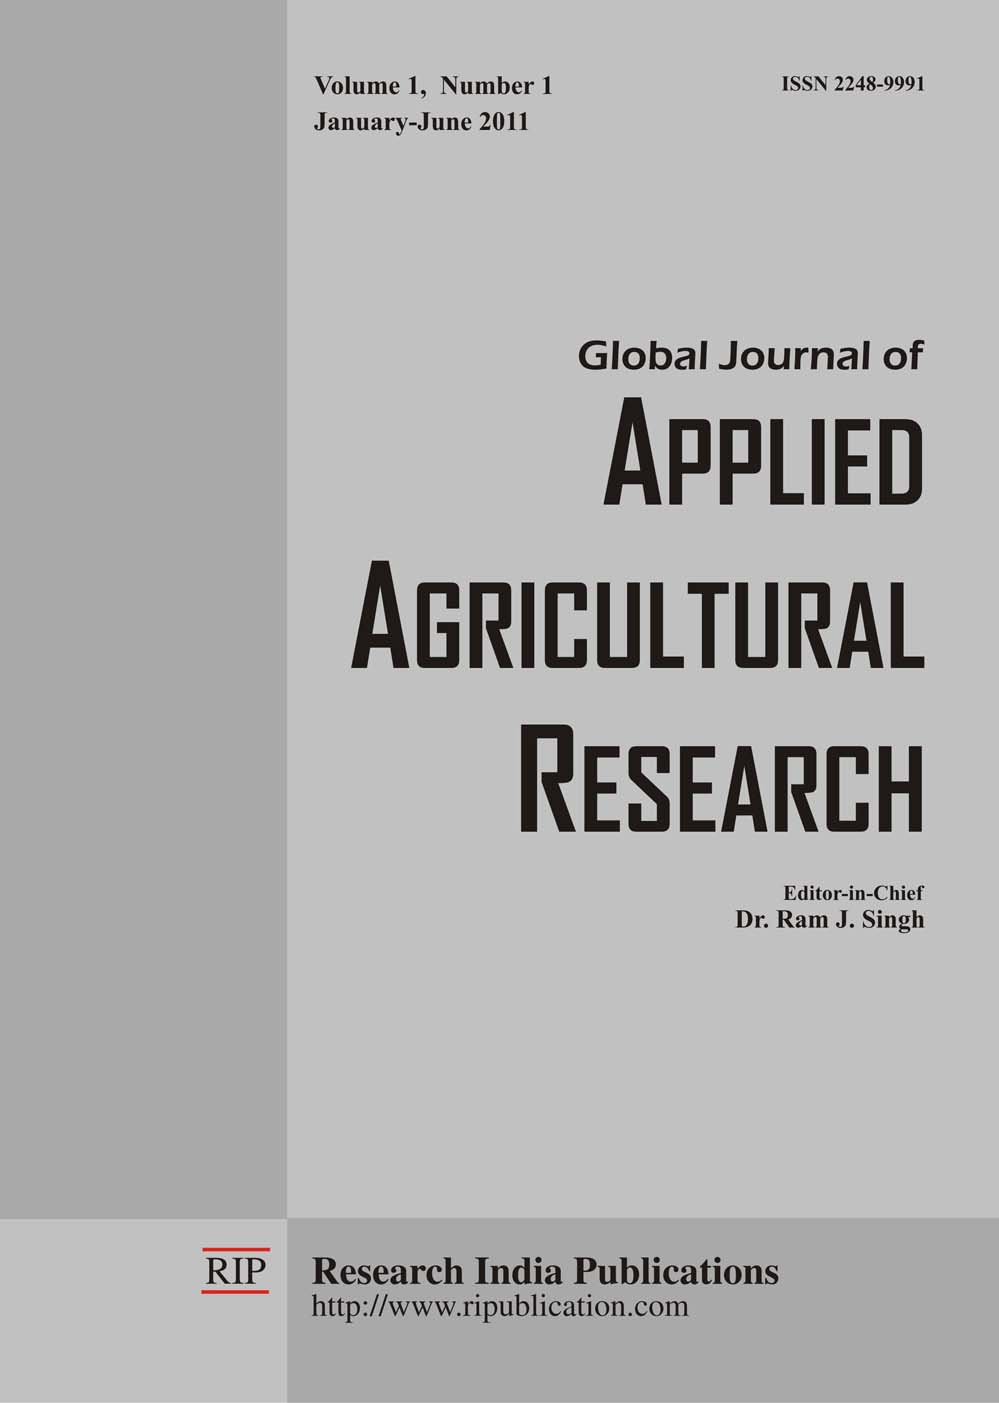 Global Journal of Applied Agricultural Research